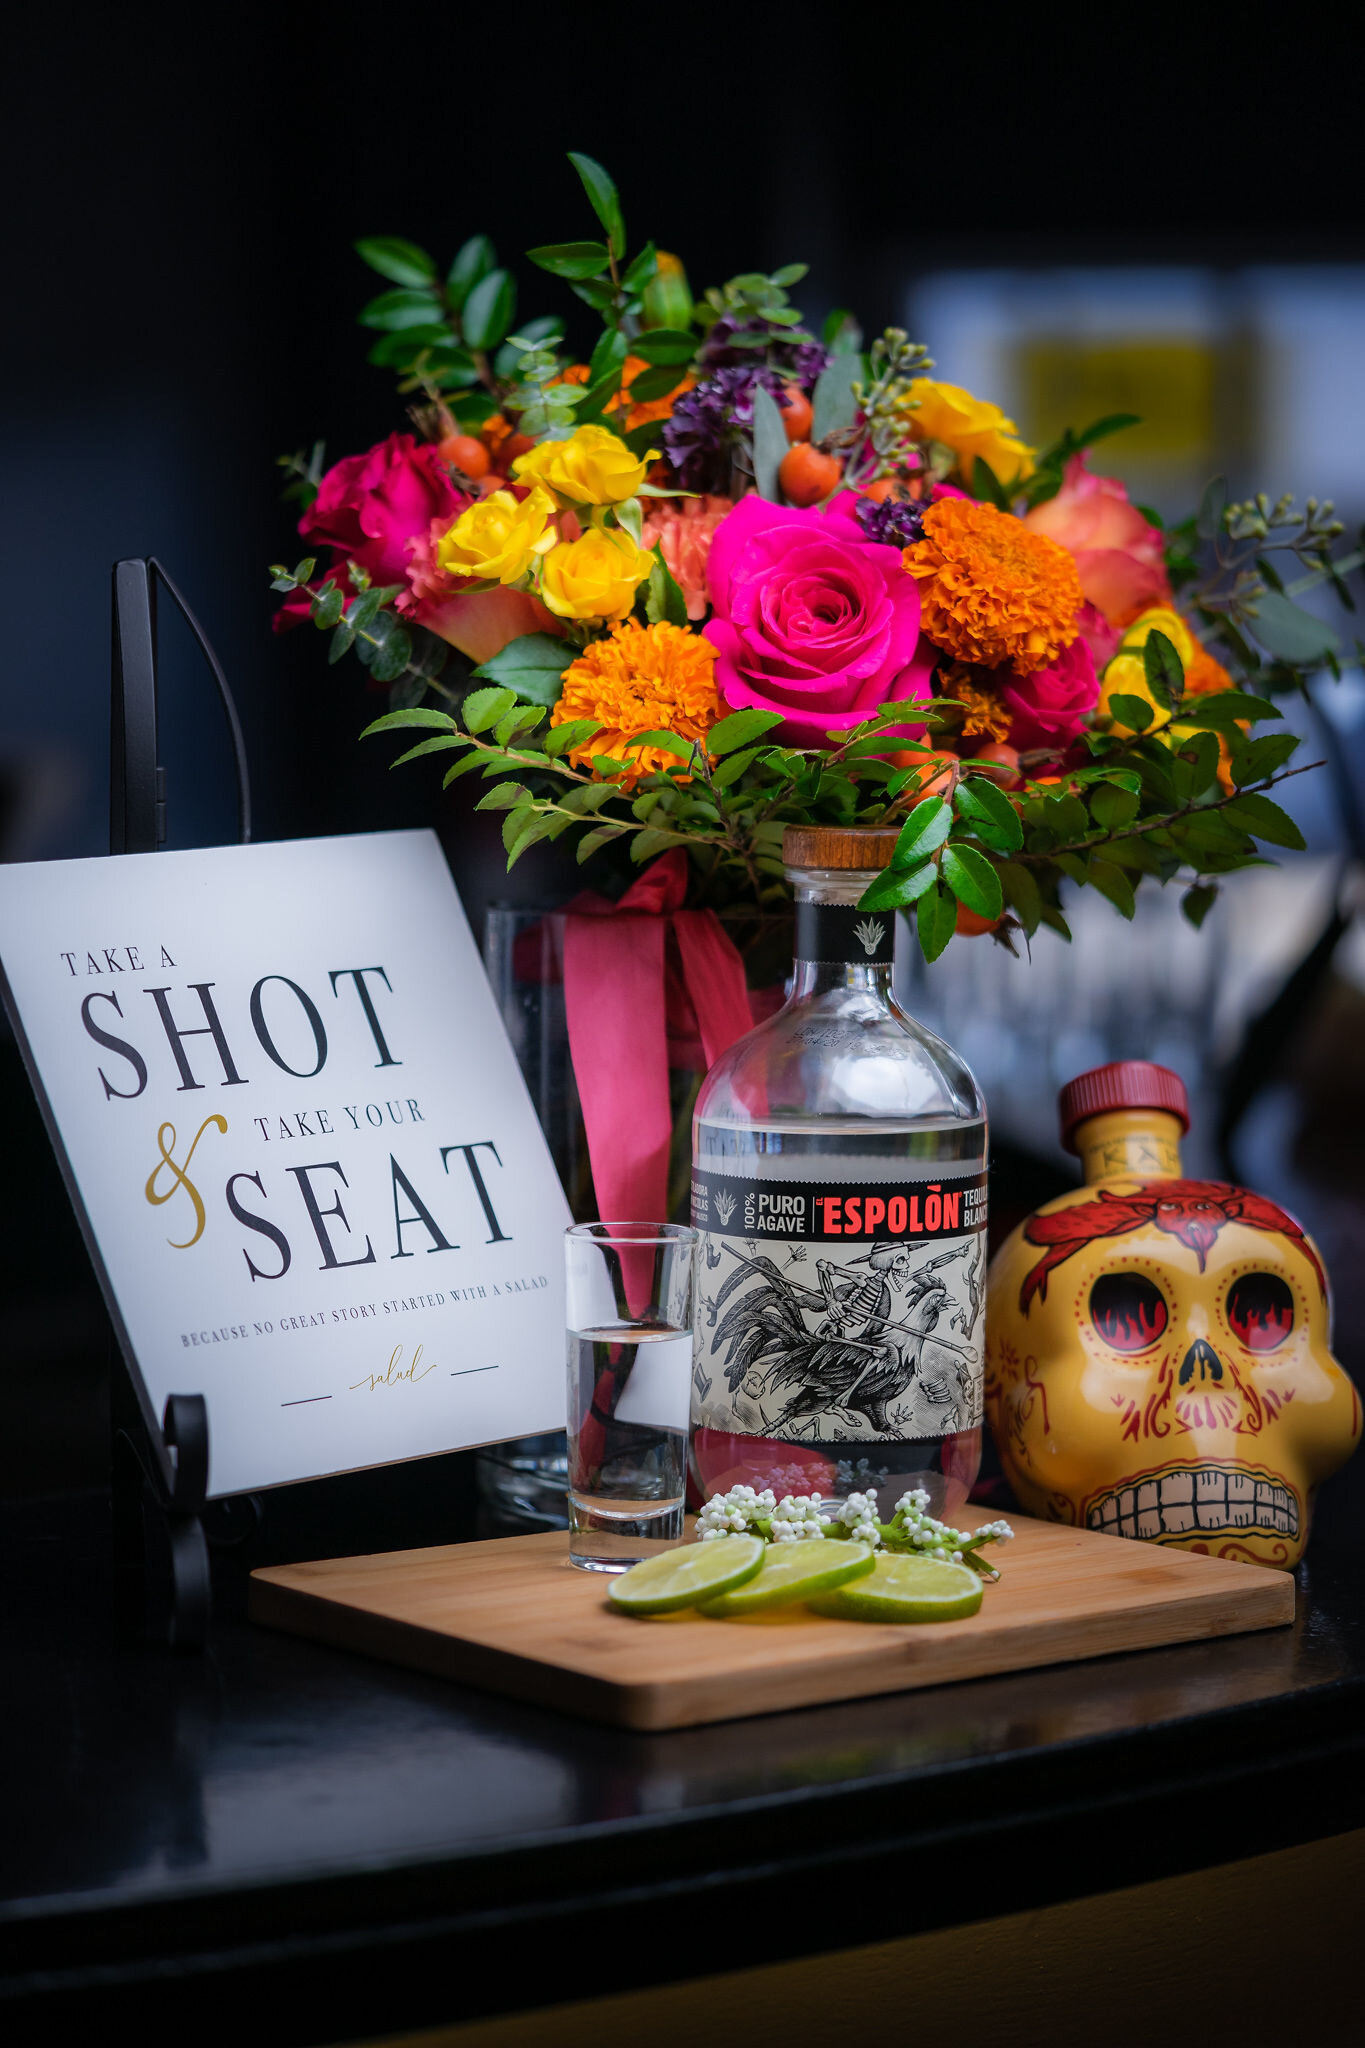 Celebrating the Mexican Culture: A Dia de los Muertas Styled Shoot captured by Aguilar Photography